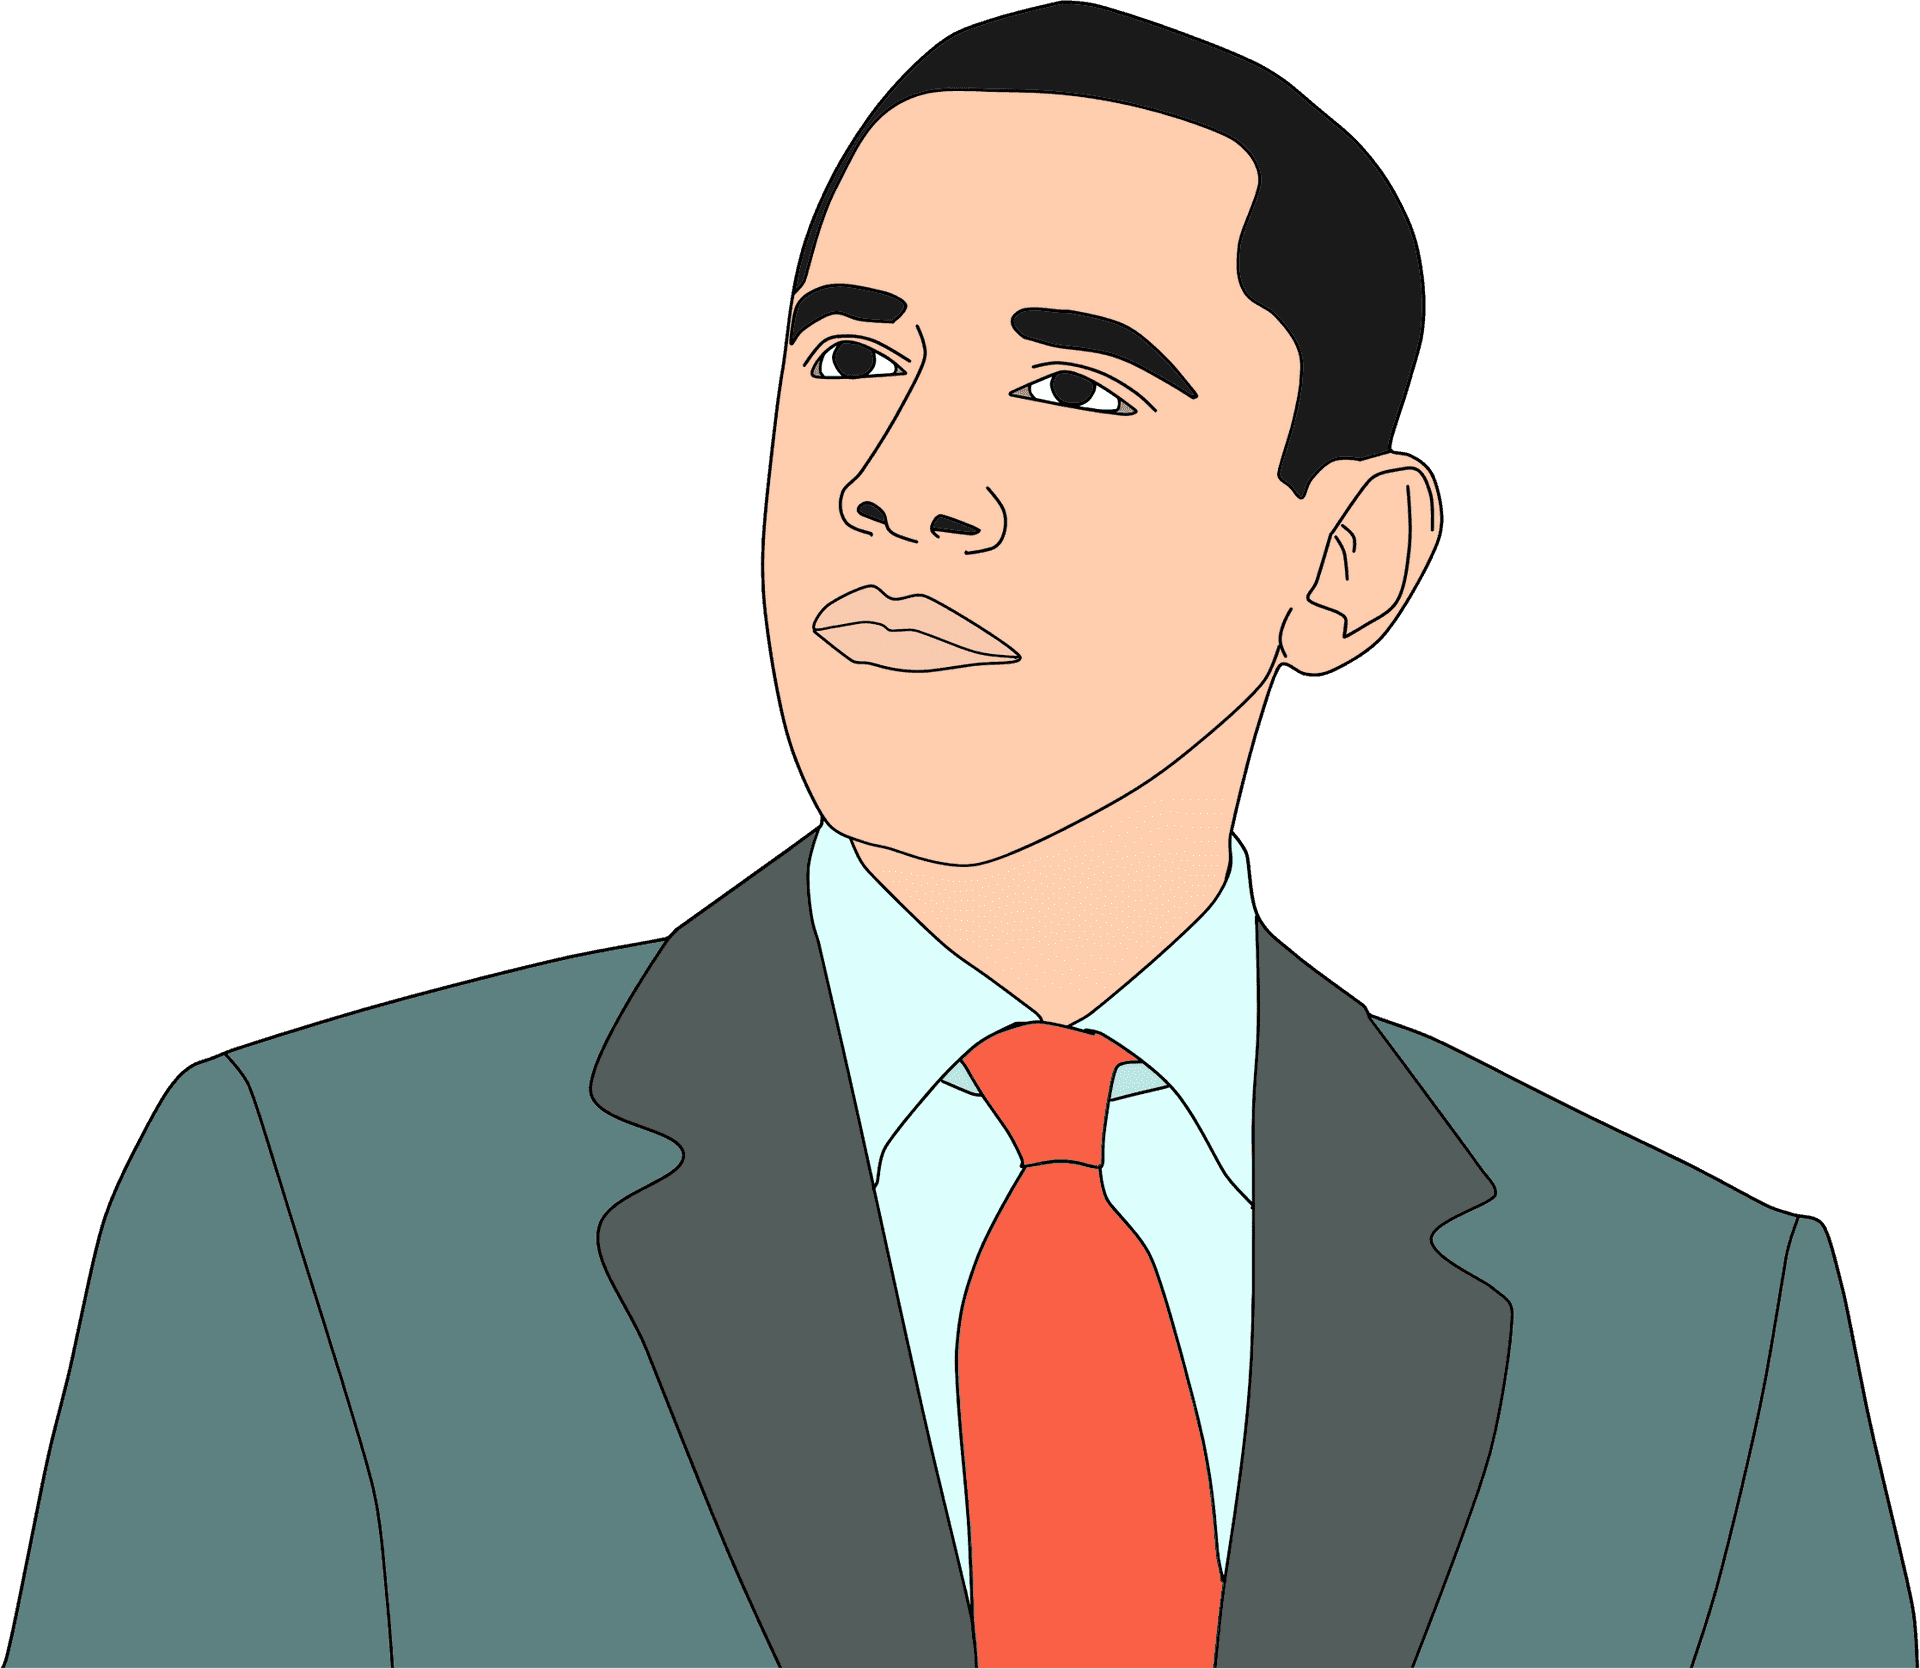 Illustrated Portraitof Manin Suit PNG image